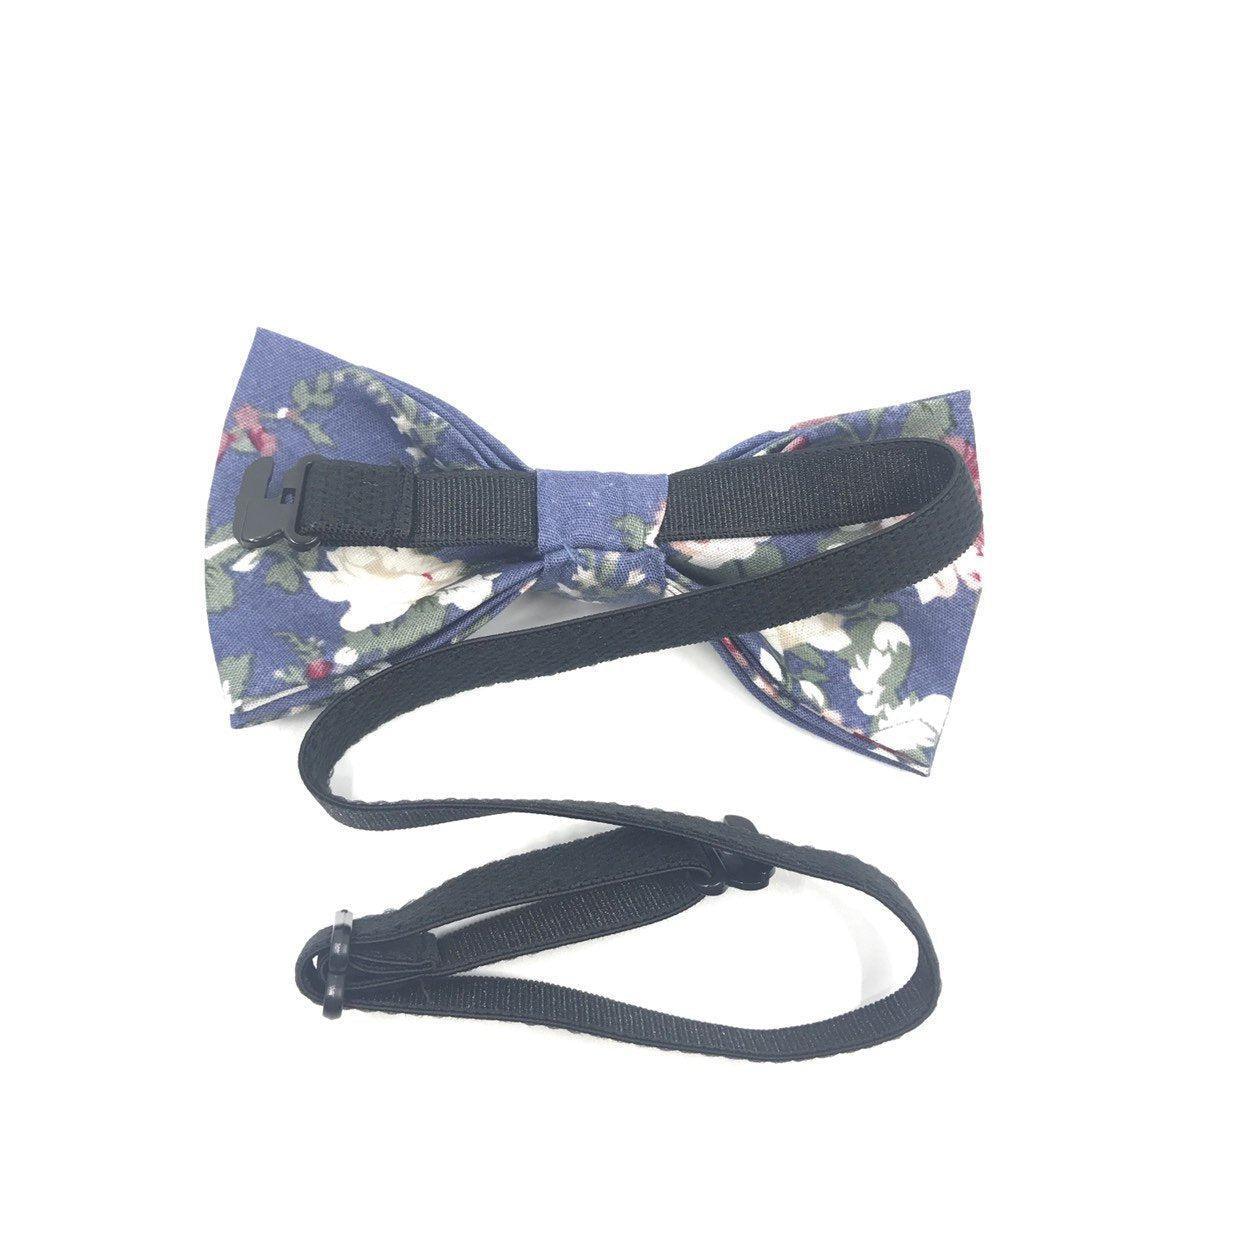 NEIL Kids Floral Pre-Tied Bow Tie-Pretied bow tie for kids and toddlers Strap is adjustablePre-Tied bowtieBow Tie 10.5 * 6CMColor: Blue Great for: Groom Groomsmen Wedding Shoots Formal Prom Fancy Parties Gifts and presents-Mytieshop